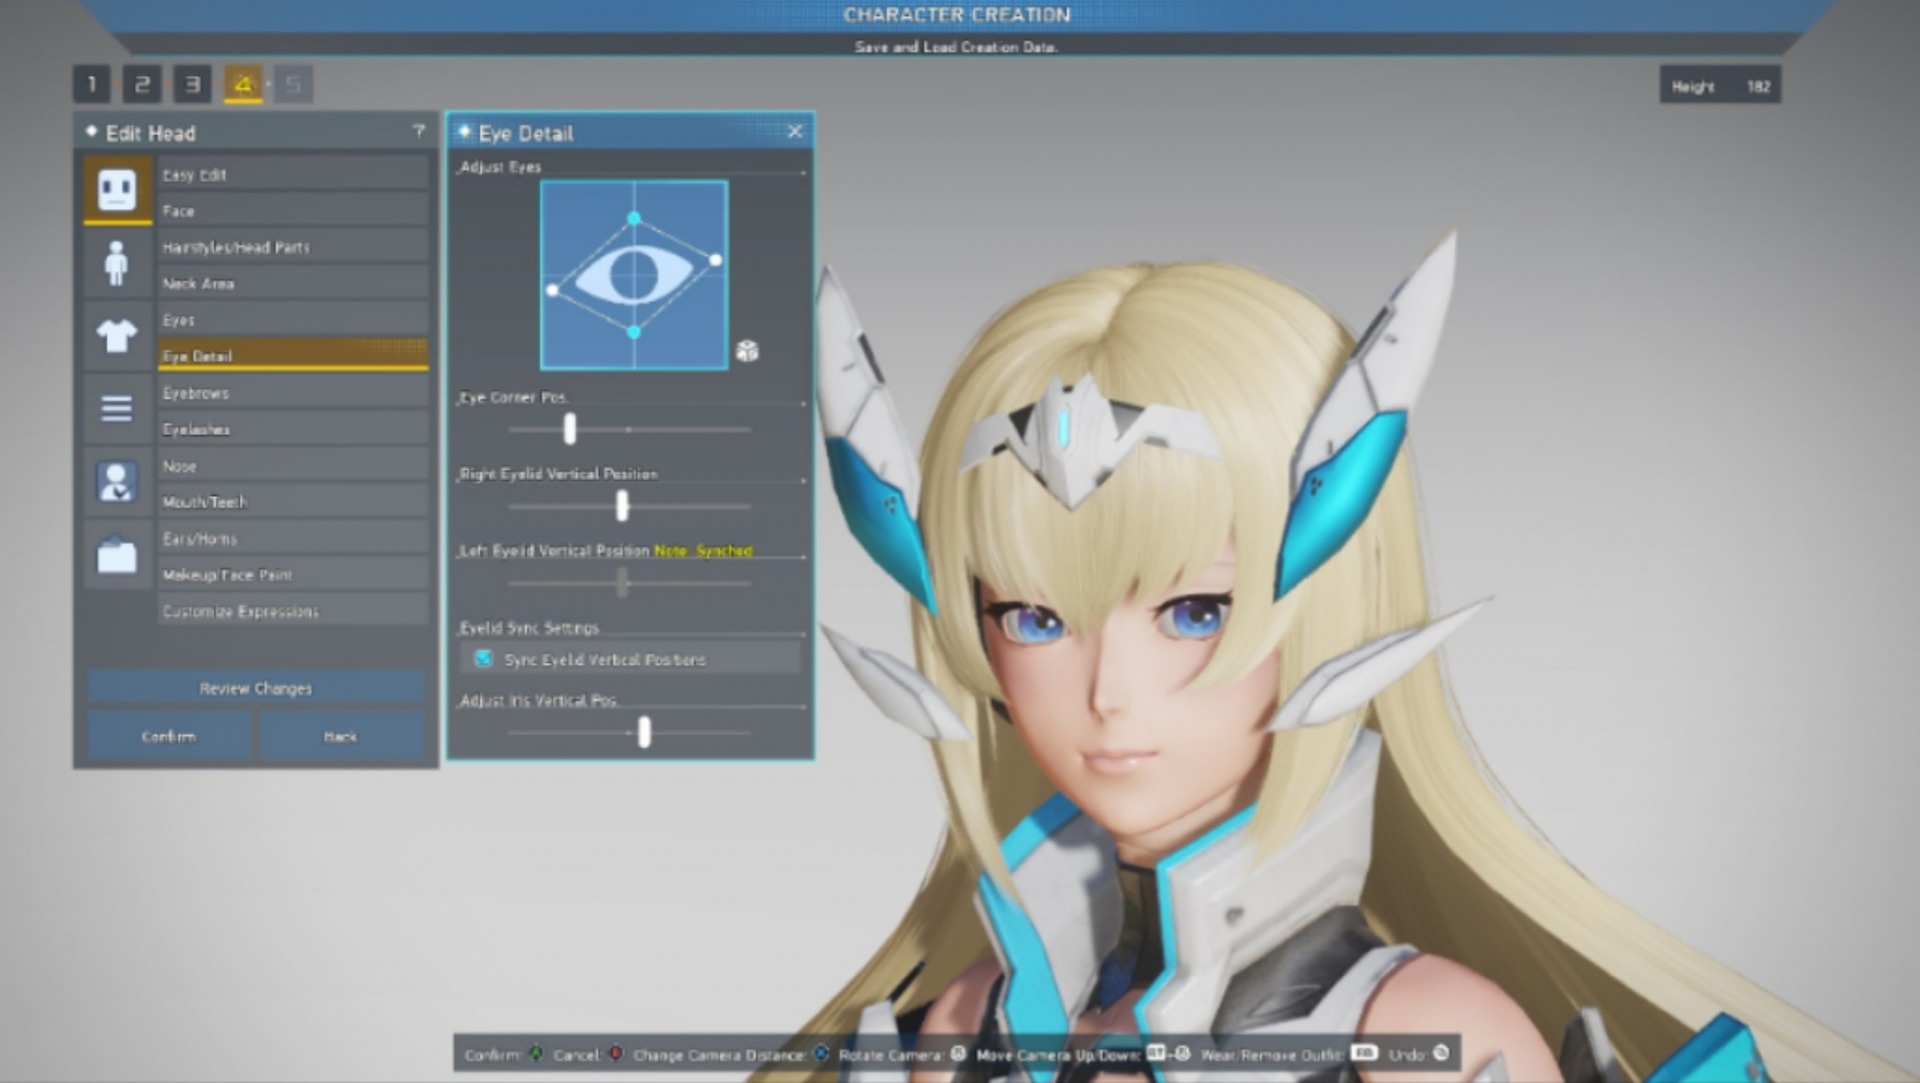 Hide Online - Avatar customization will also be available